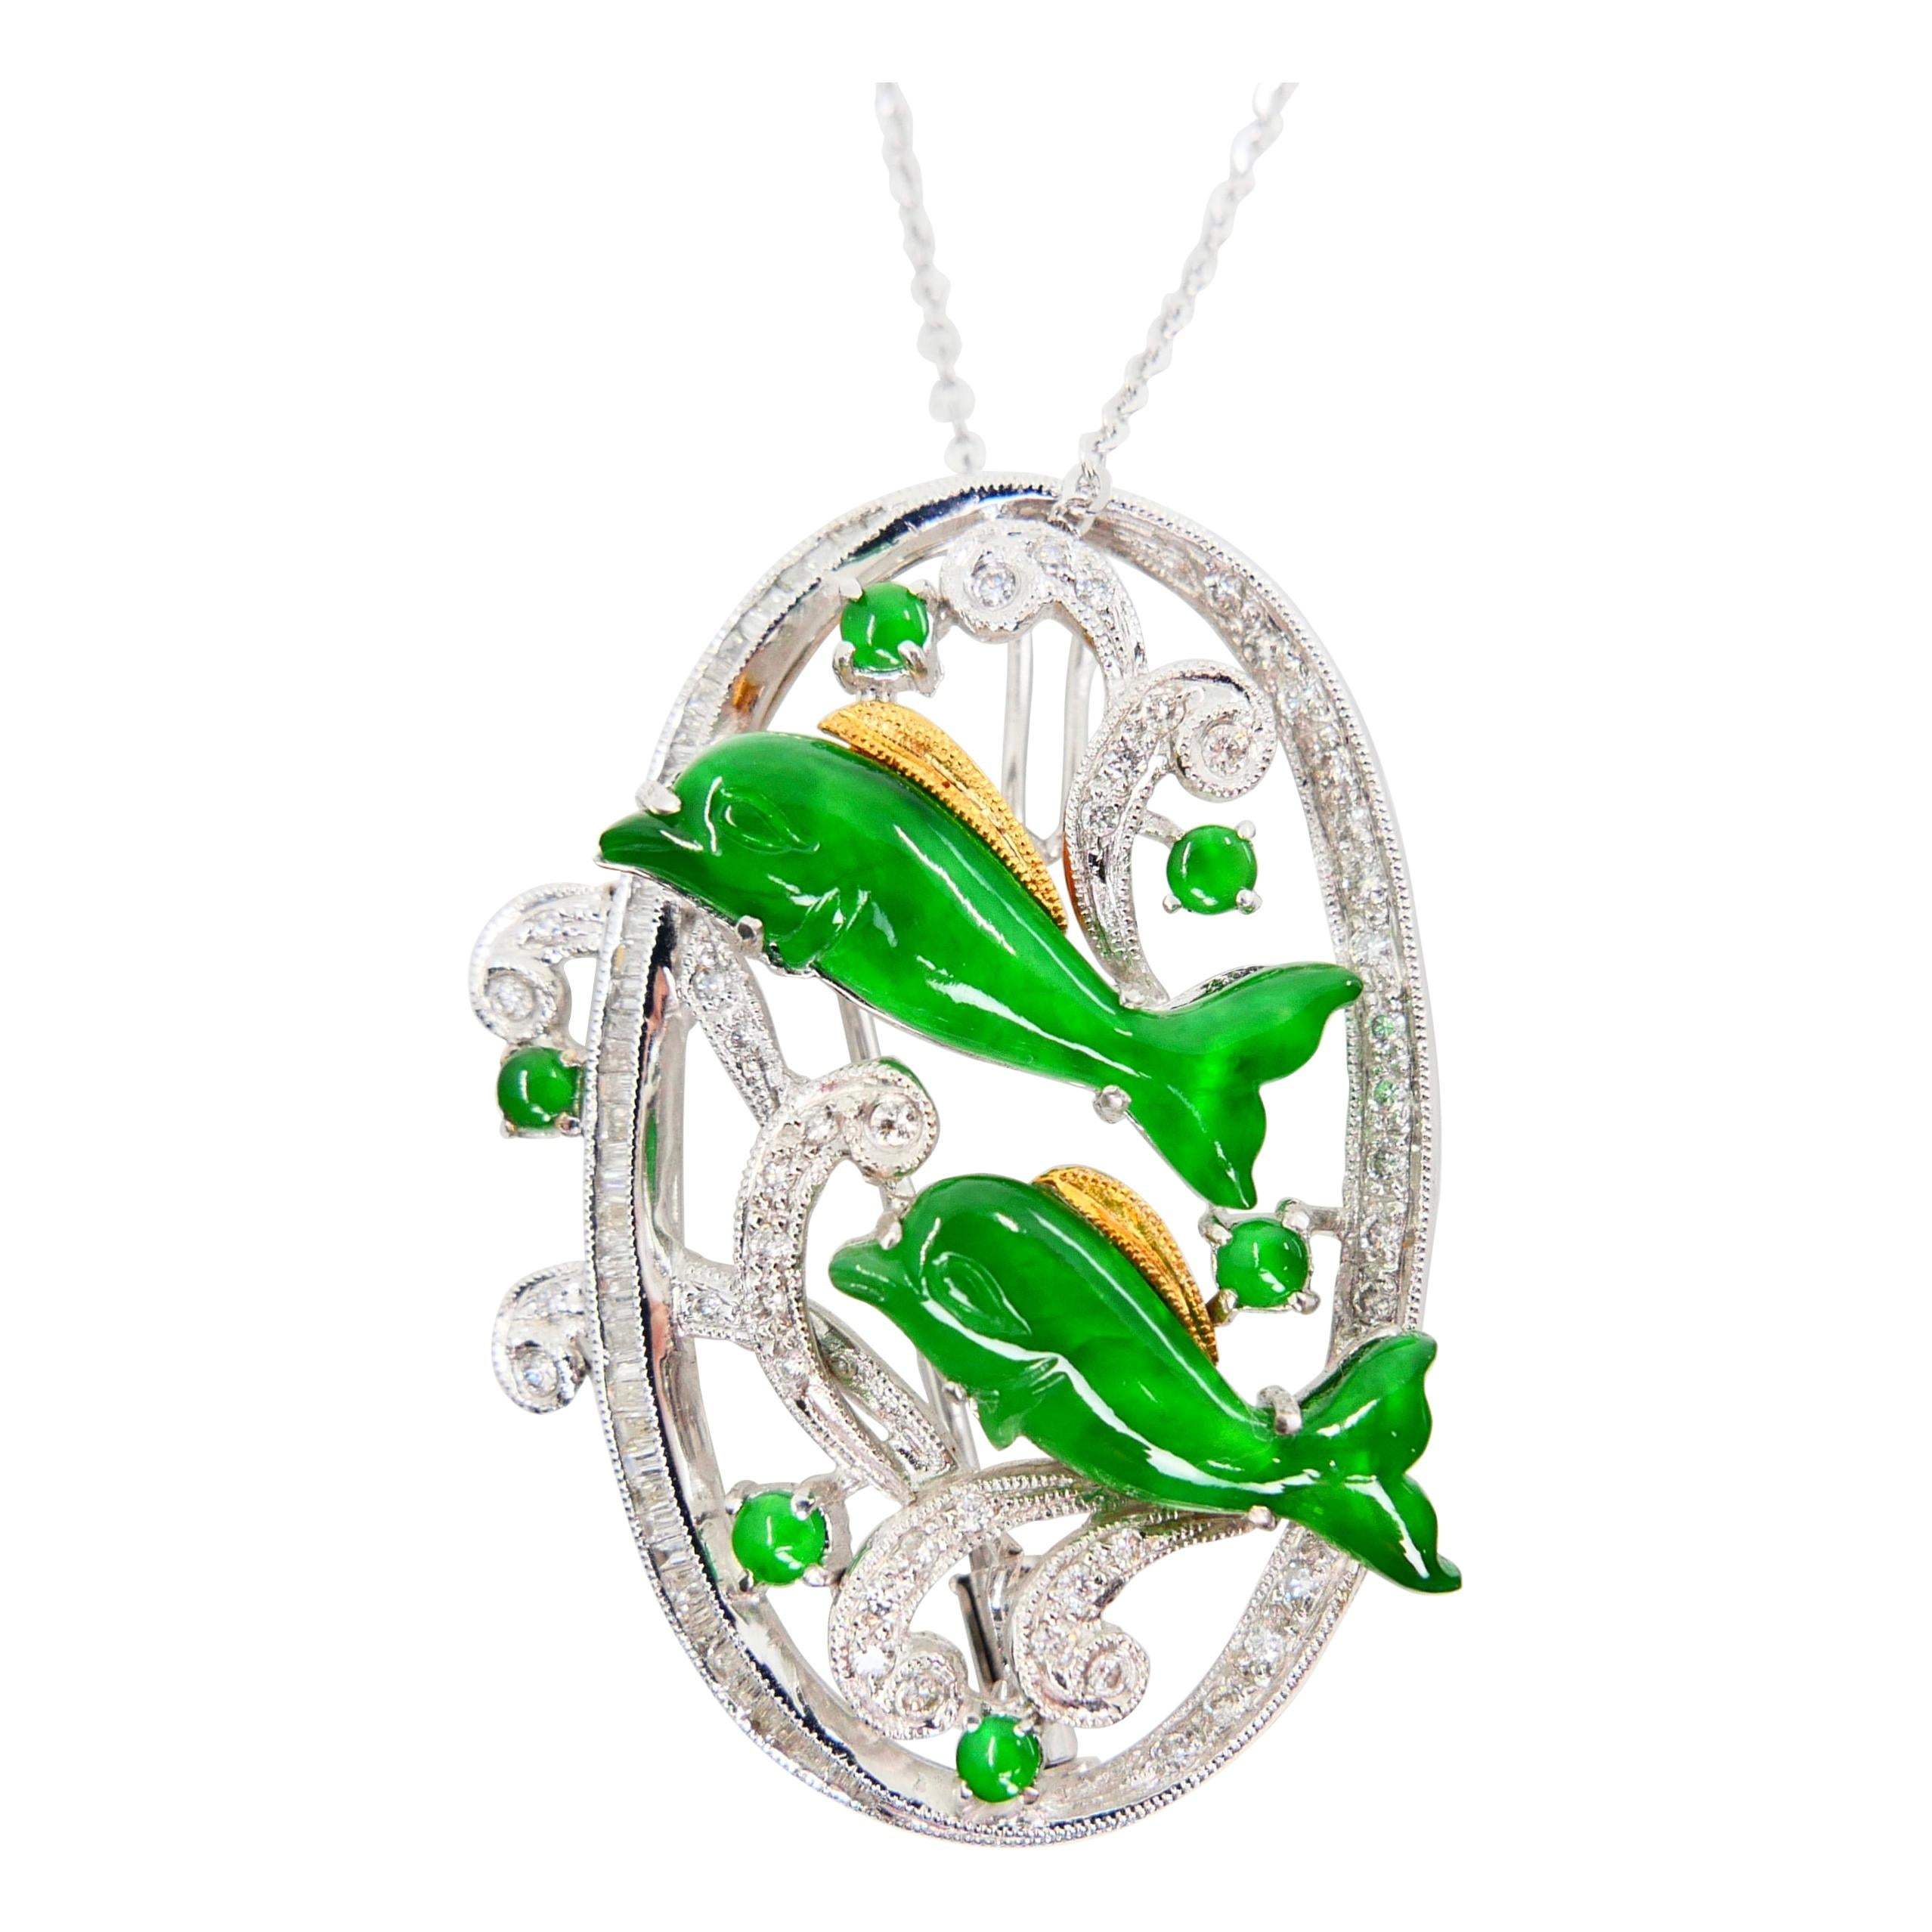 Certified Natural Jade Diamond Pendant Brooch, Vivid Apple Green, Dolphins For Sale